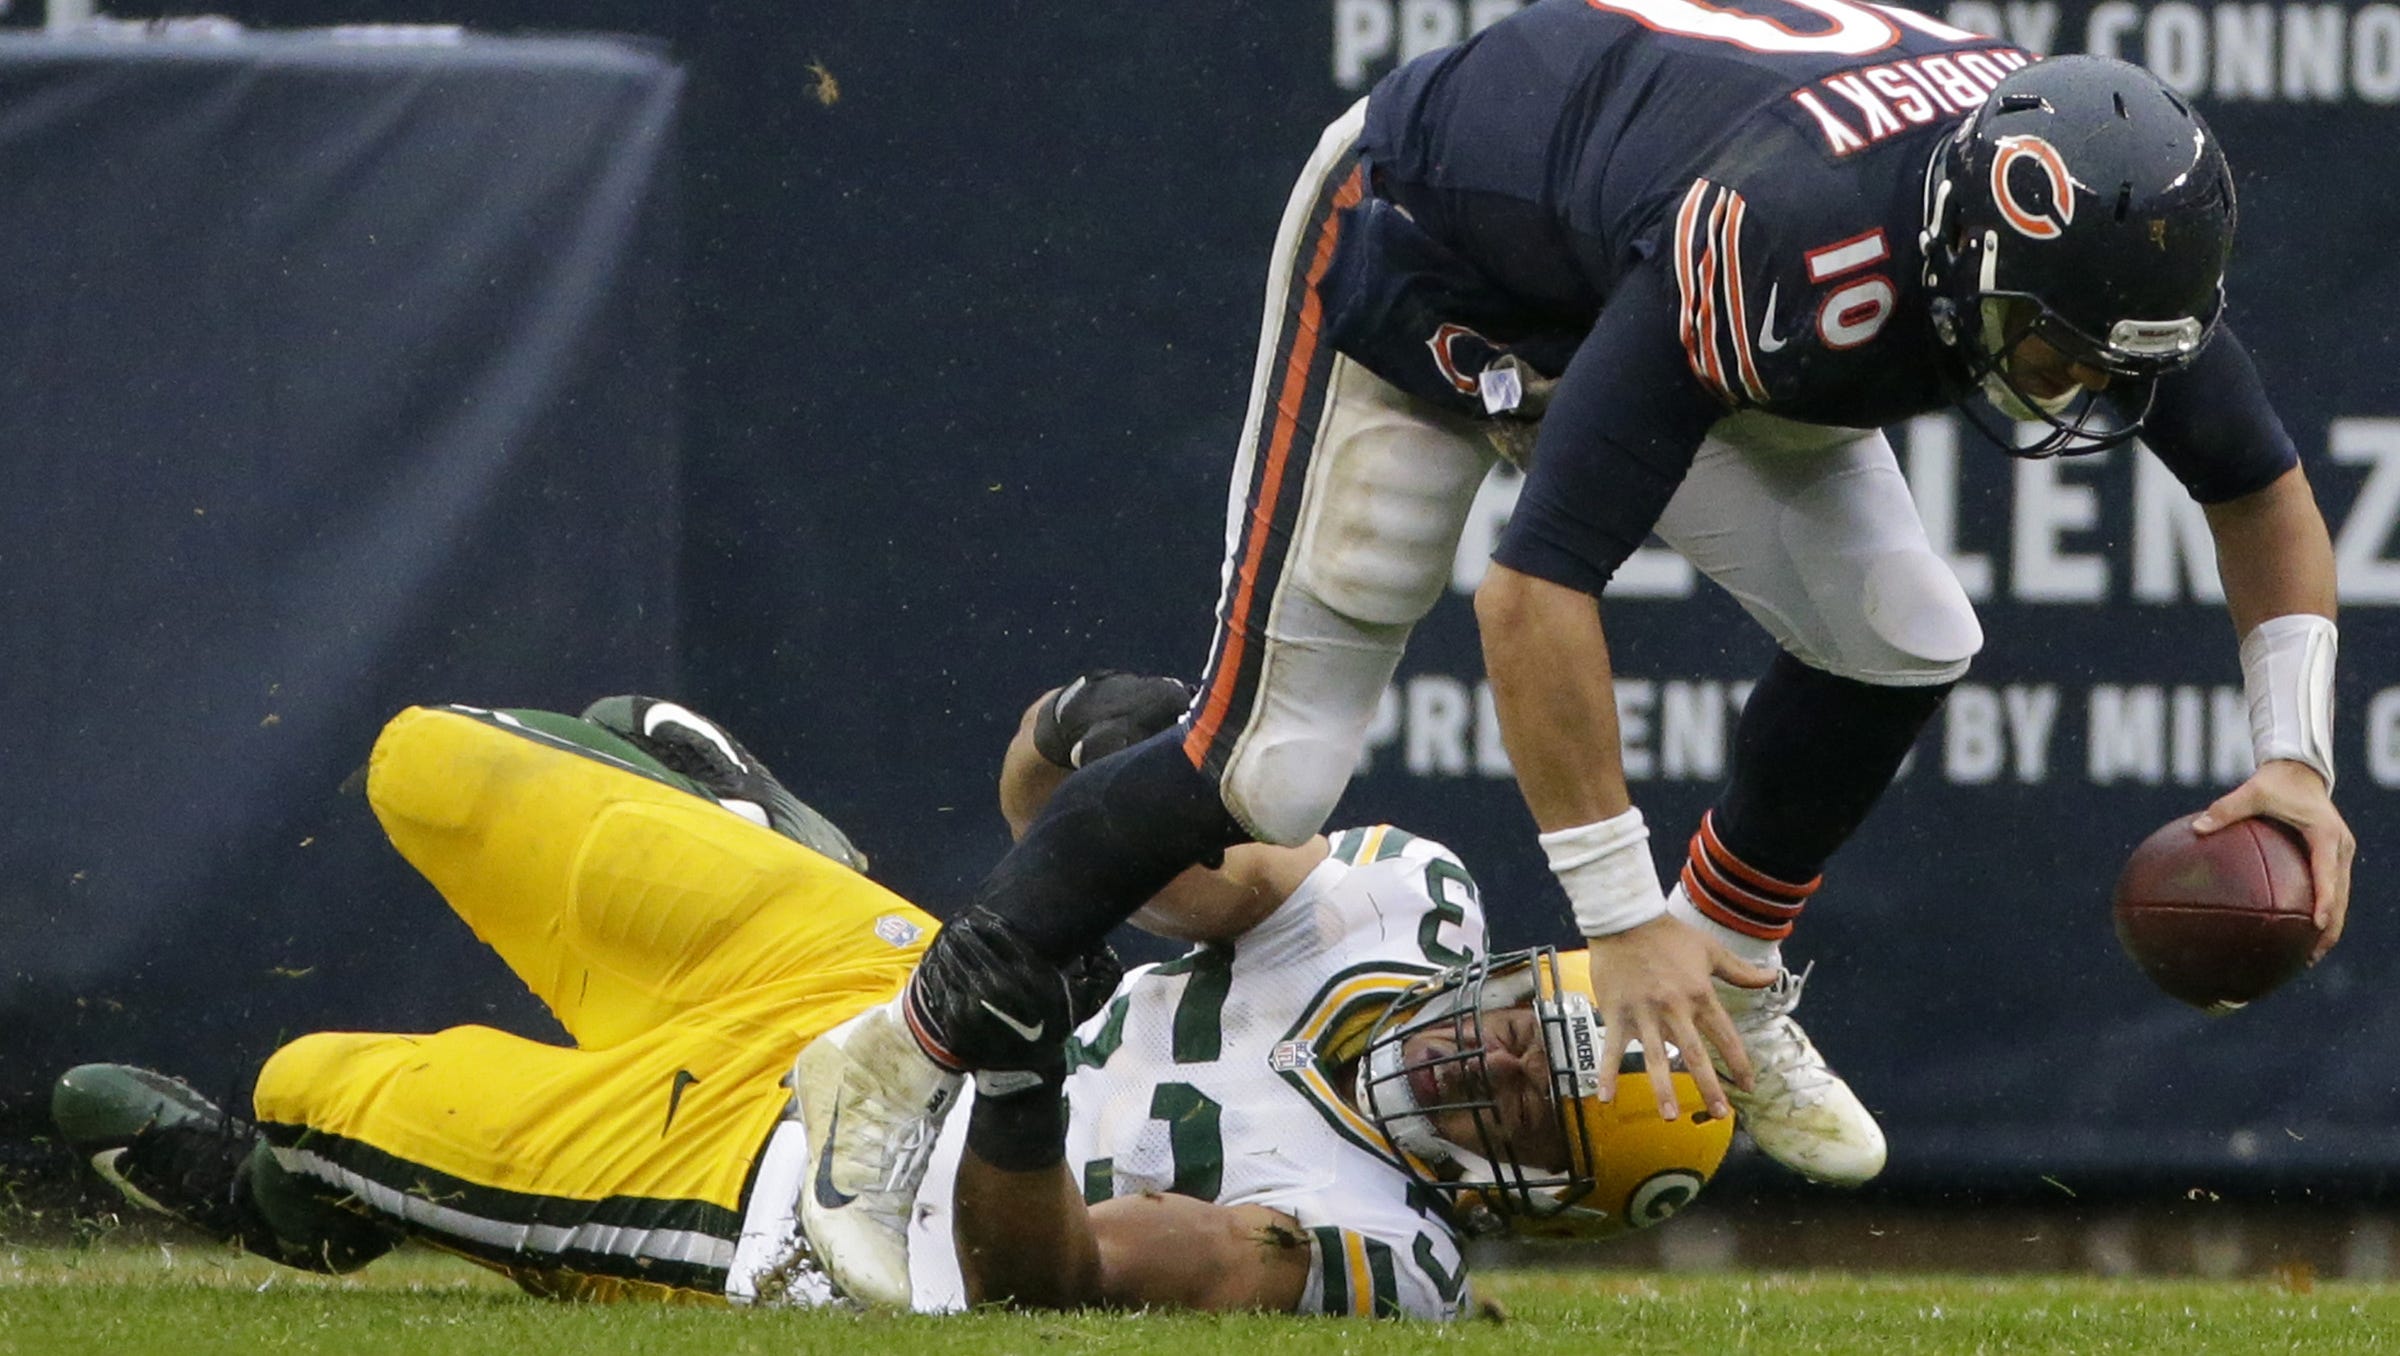 Chicago Bears quarterback Mitchell Trubisky (10) is sacked by Green Bay Packers linebacker Nick Perry (53) during the third quarter on Nov. 12, 2017, at Soldier Field in Chicago.